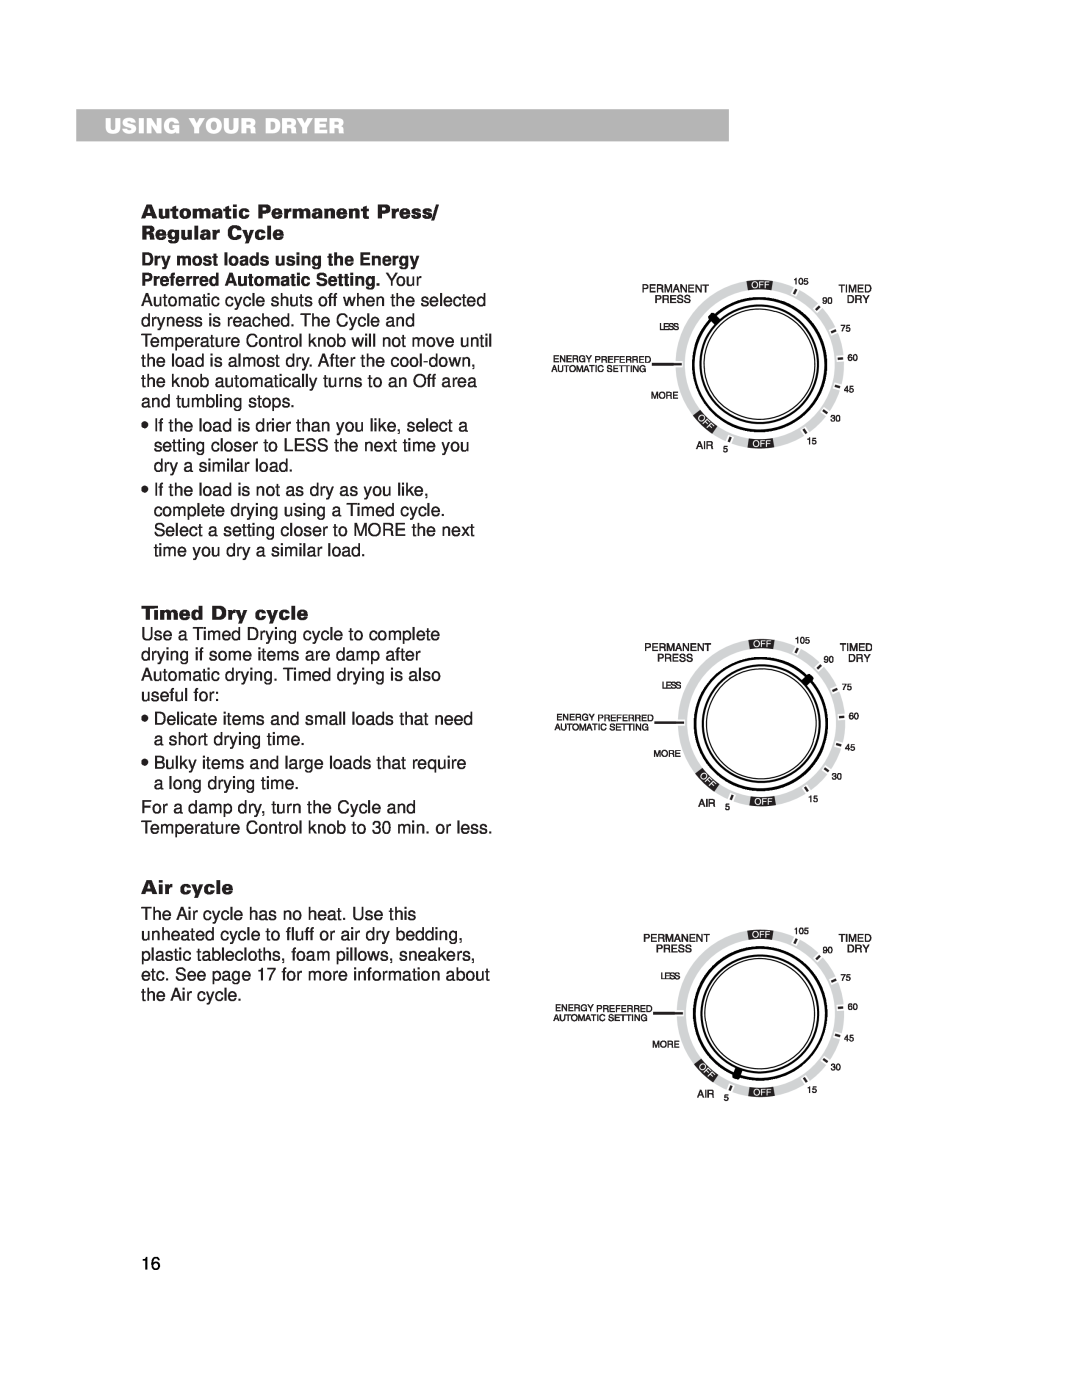 Whirlpool 3977631 Using Your Dryer, Automatic Permanent Press/ Regular Cycle, Timed Dry cycle, Air cycle 